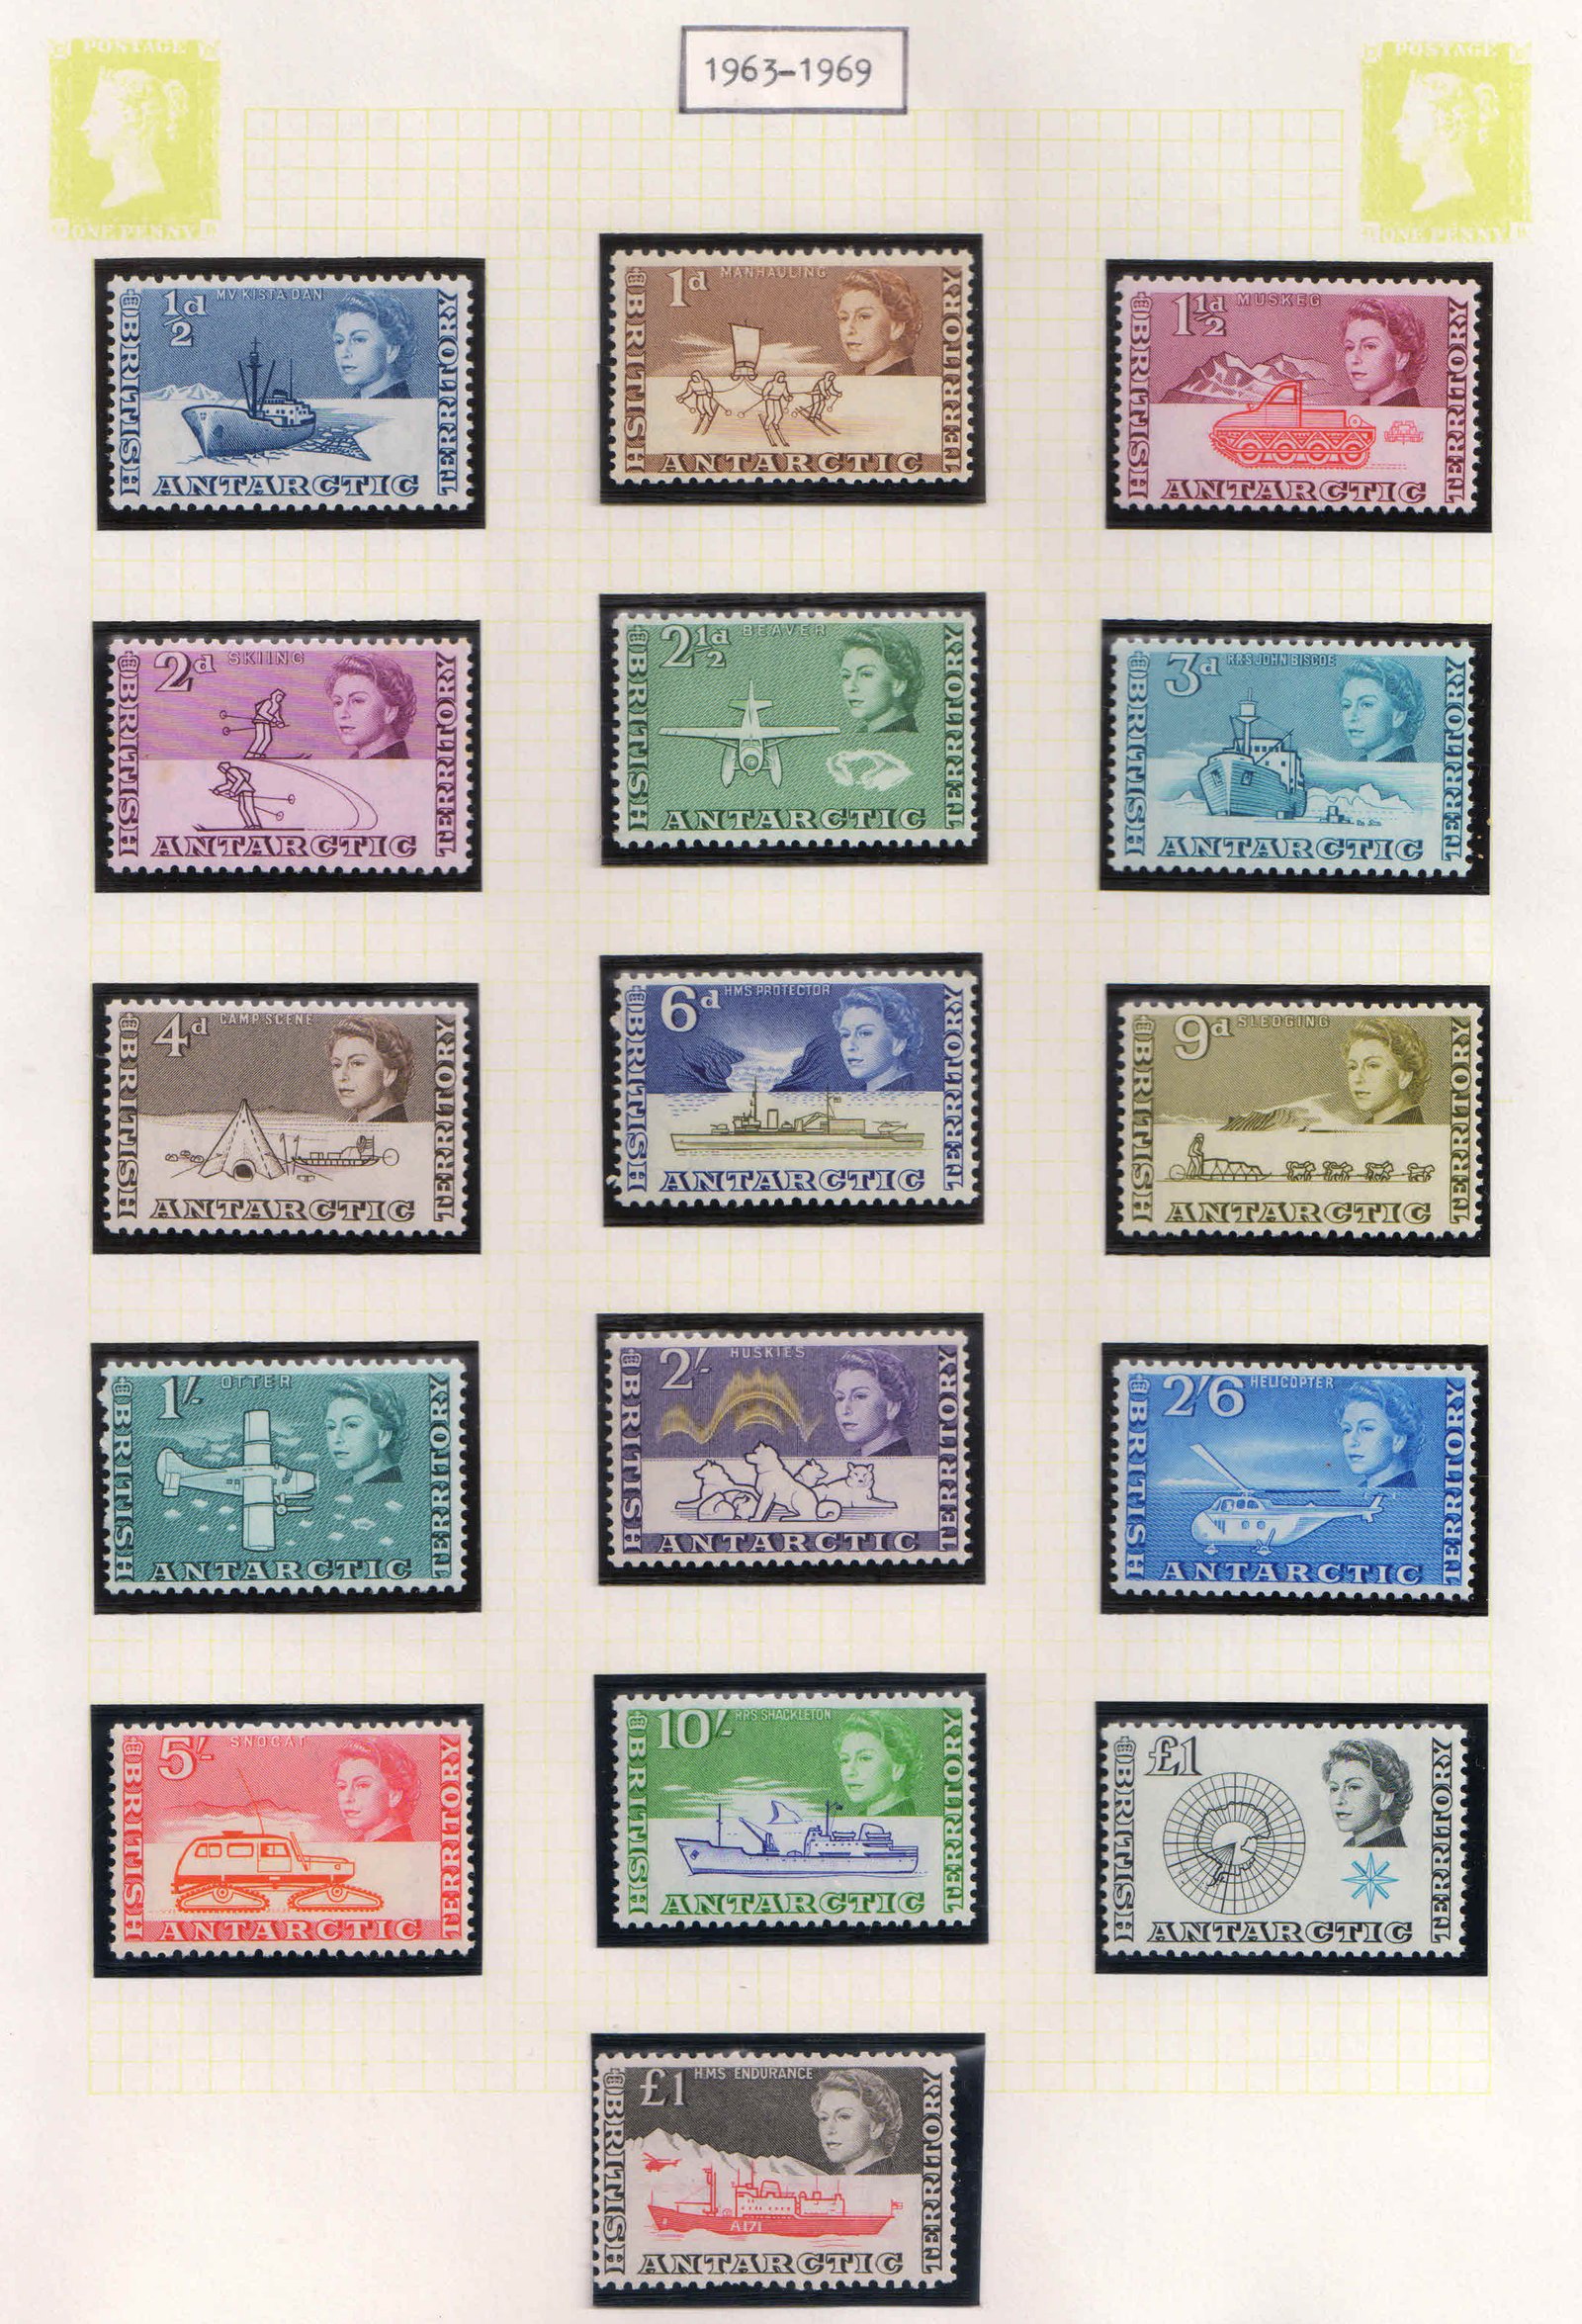 BRITISH ANTARCTIC TERRITORY 1963-1st Issue, Pictorial Series-Ships & Aircrafts-Complete Set of 16 Stamps, MNH, S.G. 1-15a, Cat £ 308